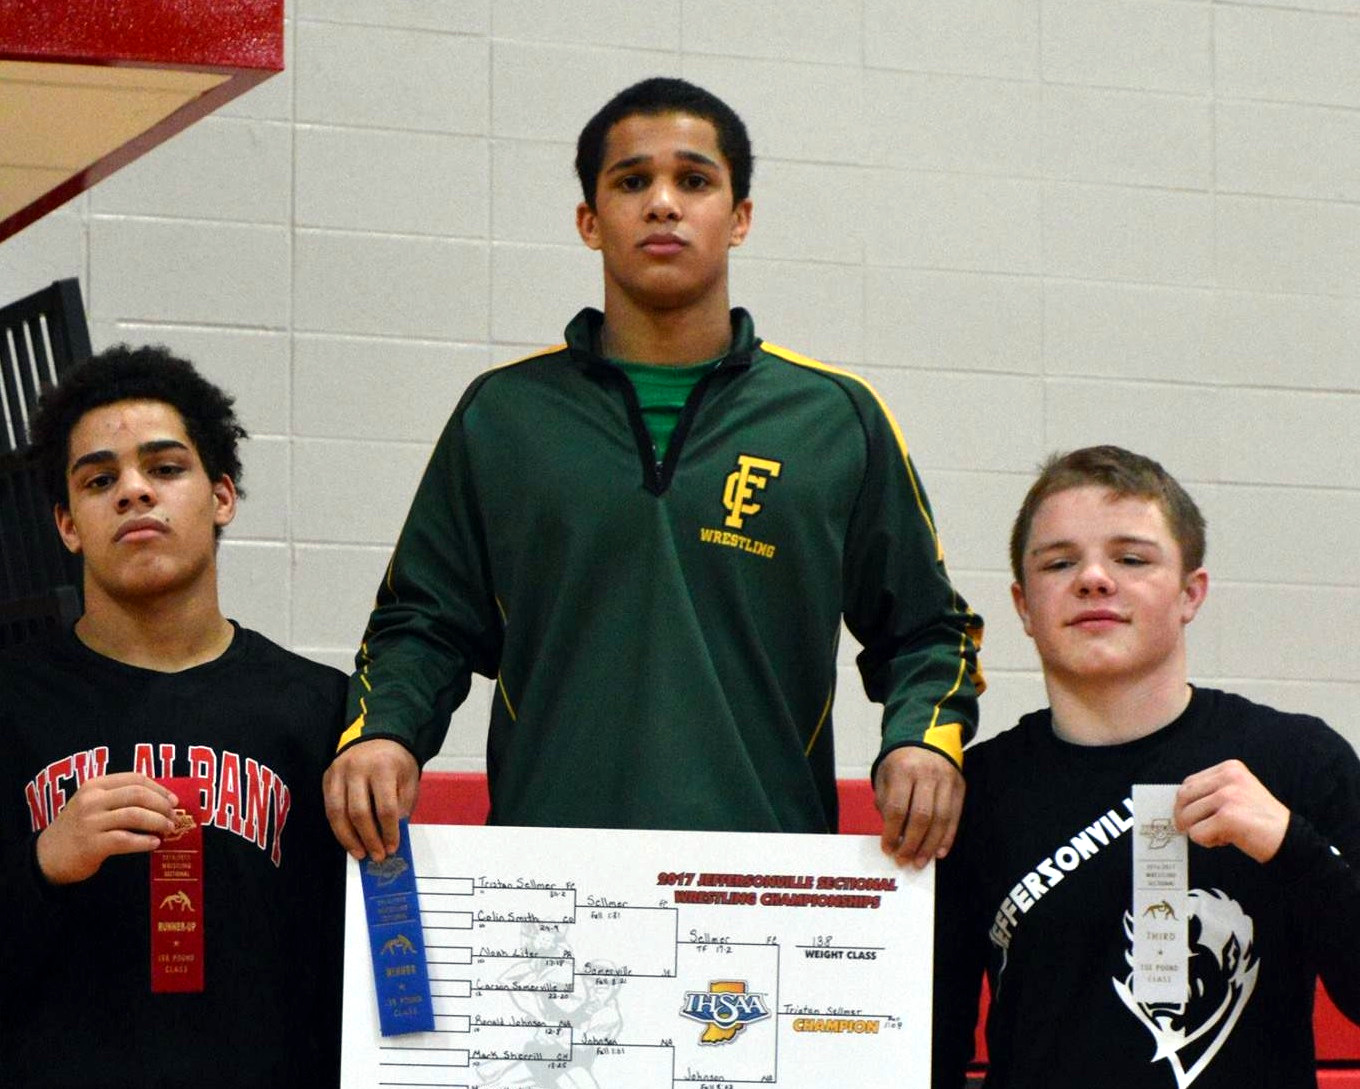 More information about "#WrestlingWednesday: Sellmer looking to punch his ticket to state"